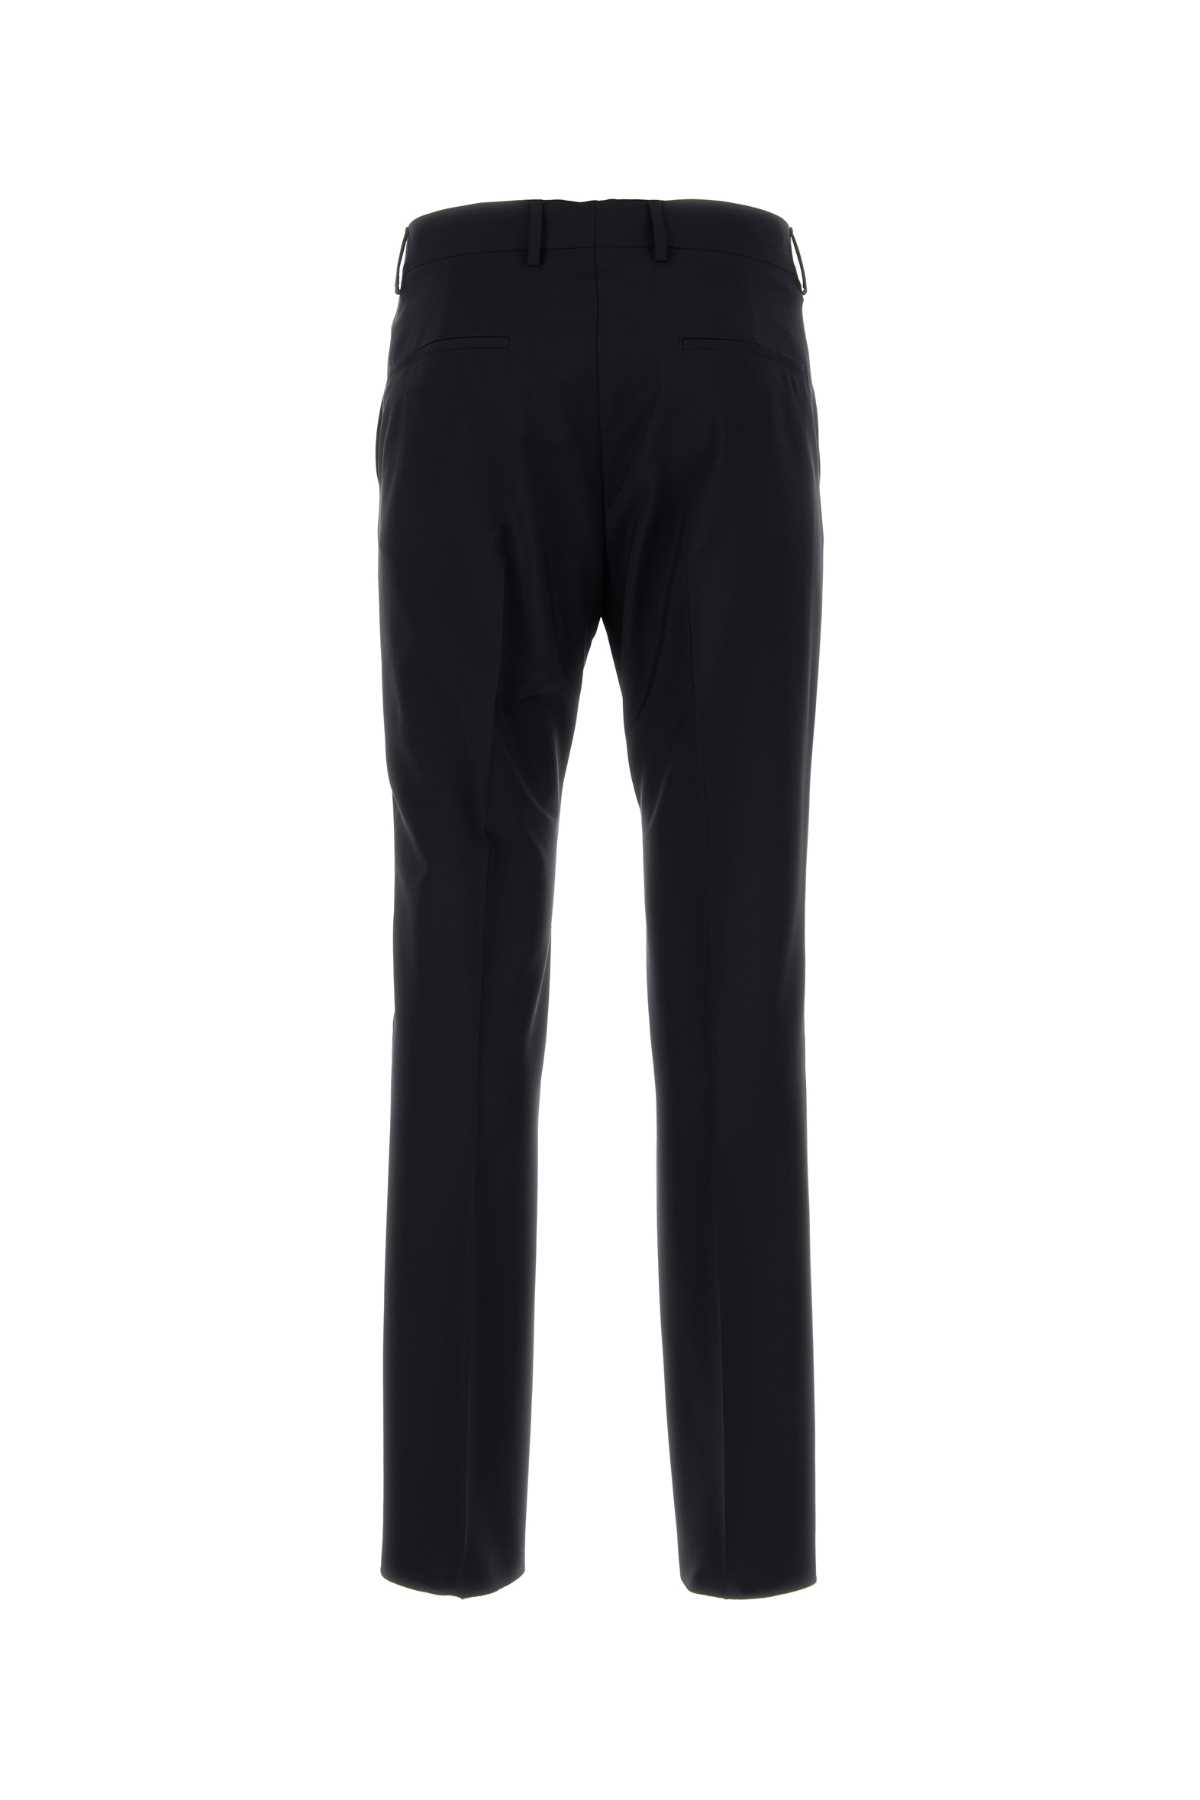 Valentino Midnight Blue Wool Blend Pant In 0no